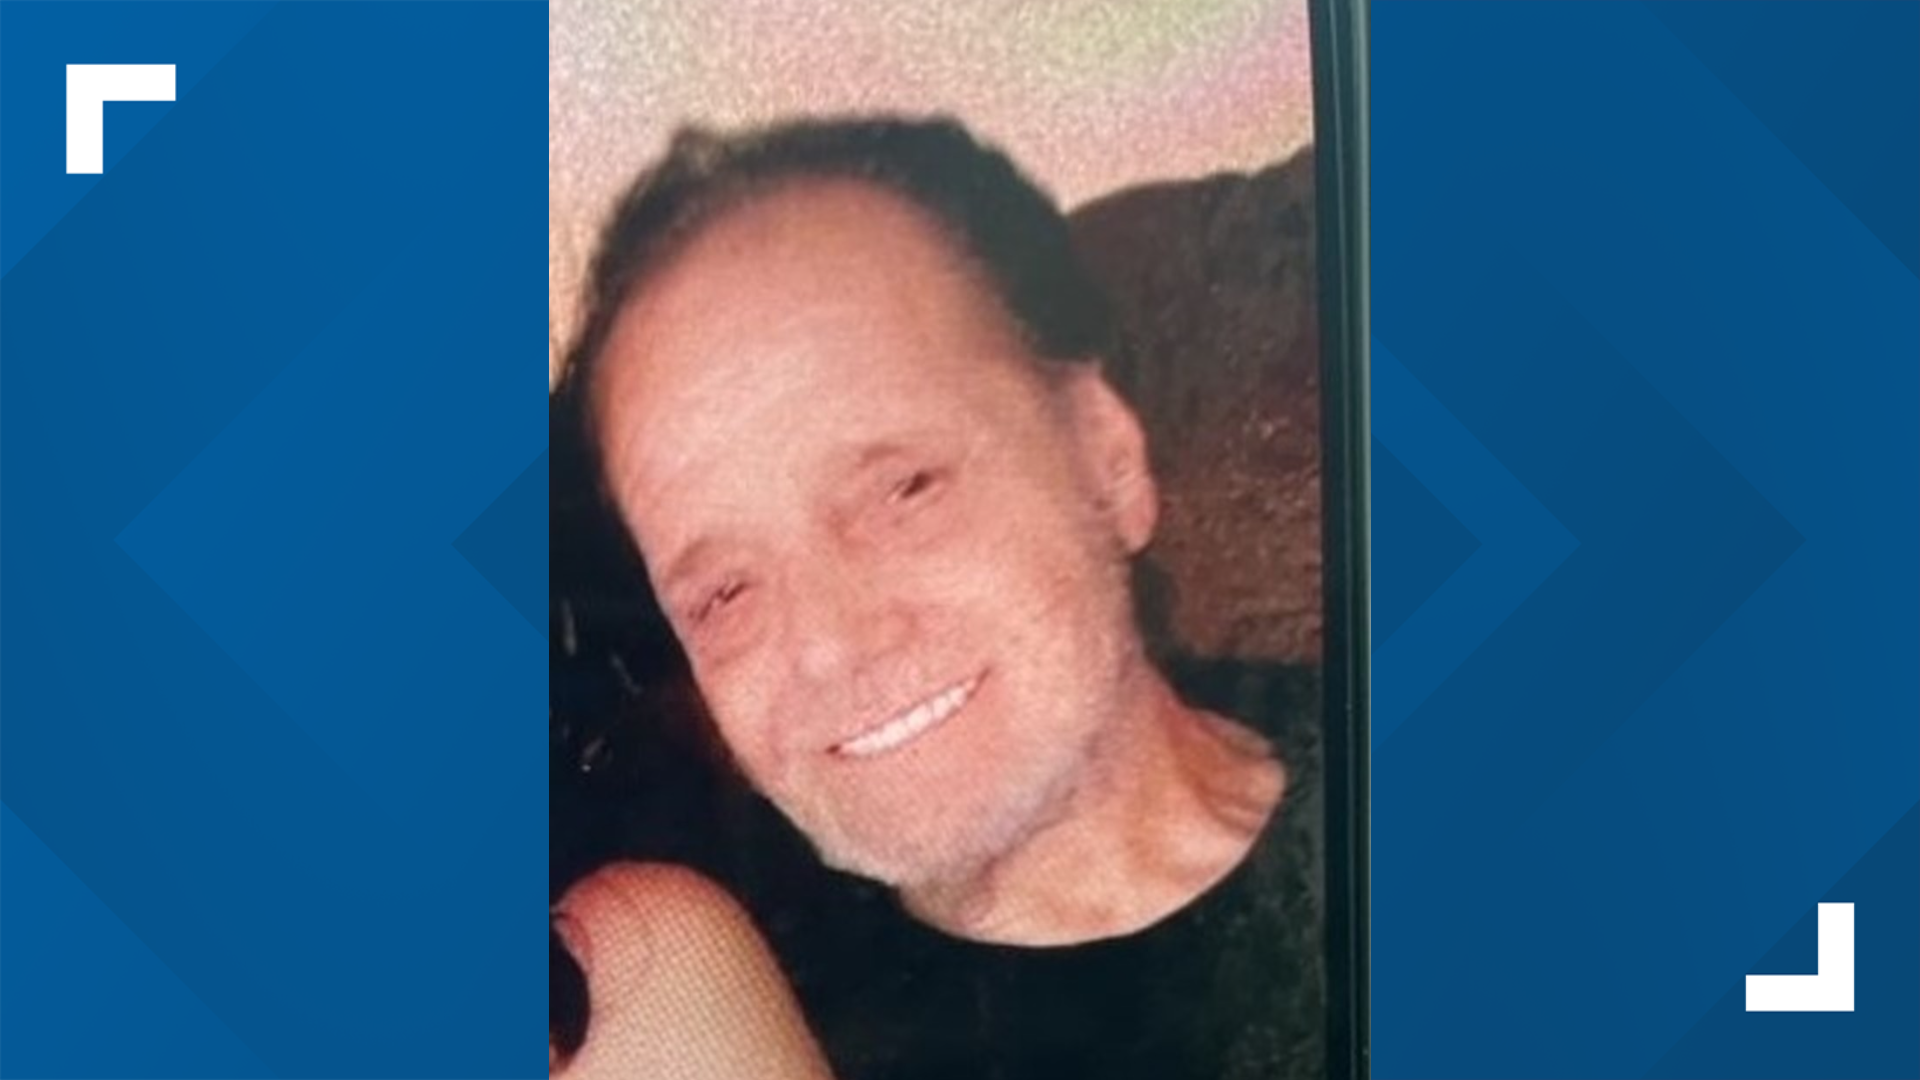 Lmpd Searching For Missing Elderly Man 1690